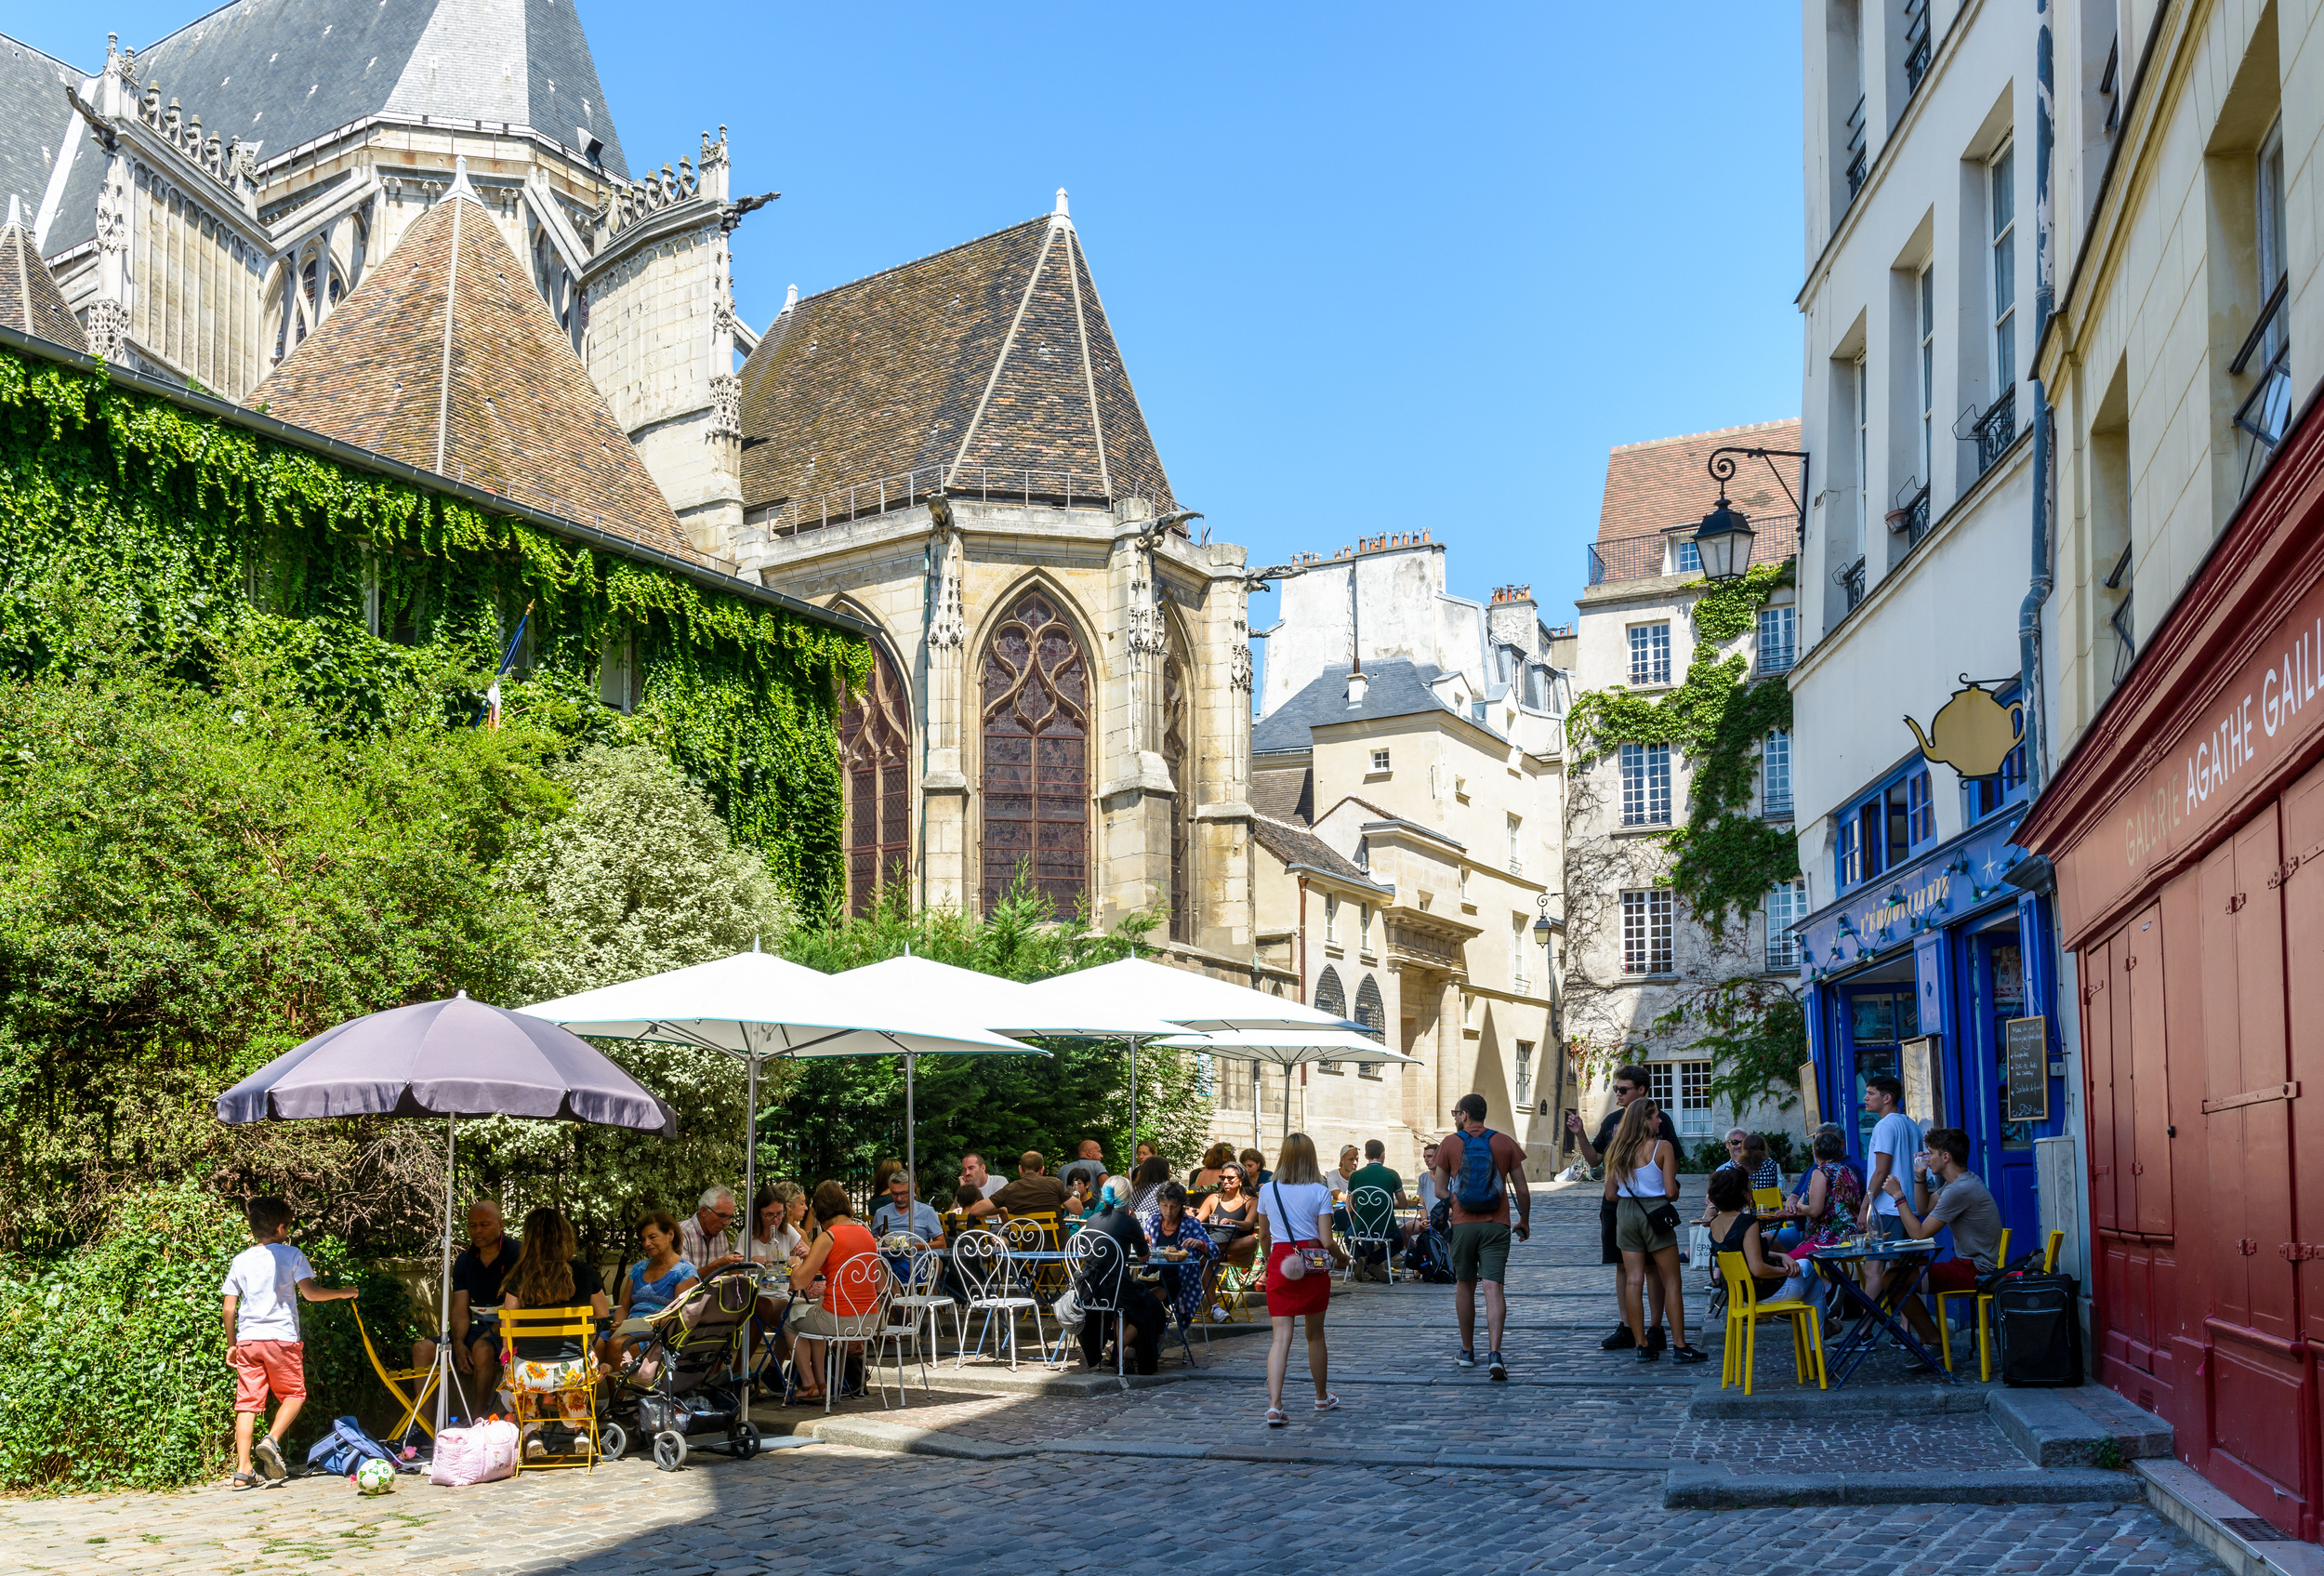 <p>The Marais is one of the city's most beautiful and historic parts to stroll. Definitely reserve an entire afternoon to wander this picturesque neighborhood with winding streets and shops waiting to be explored. </p><p><a href='https://www.msn.com/en-us/community/channel/vid-cj9pqbr0vn9in2b6ddcd8sfgpfq6x6utp44fssrv6mc2gtybw0us'>Follow us on MSN to see more of our exclusive lifestyle content.</a></p>